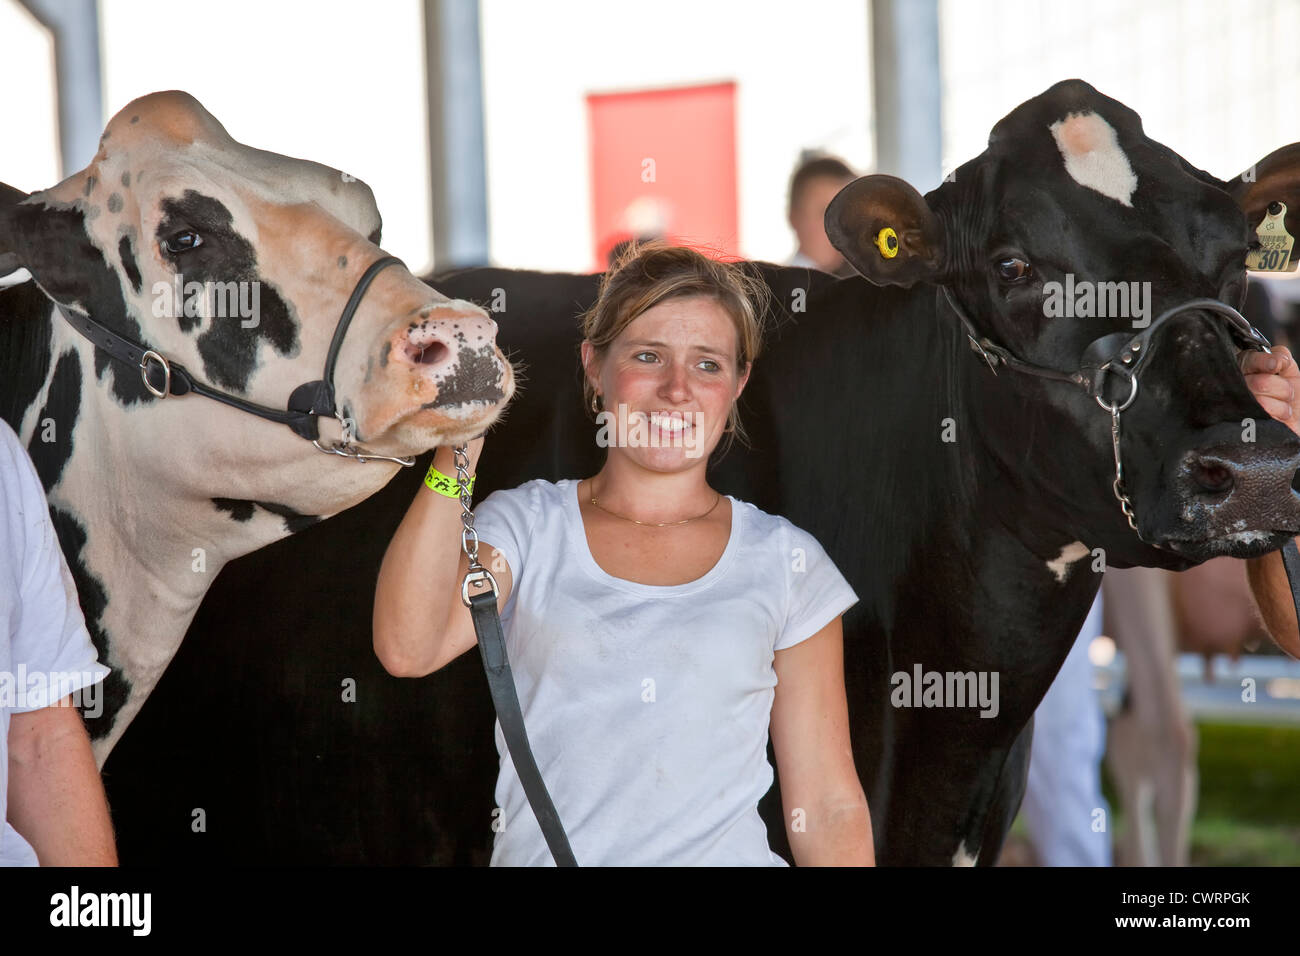 Competitors in the dairy show at the Evangeline Agricultural Exhibition and Acadian Festival in Prince Edward Island, Canada, Stock Photo